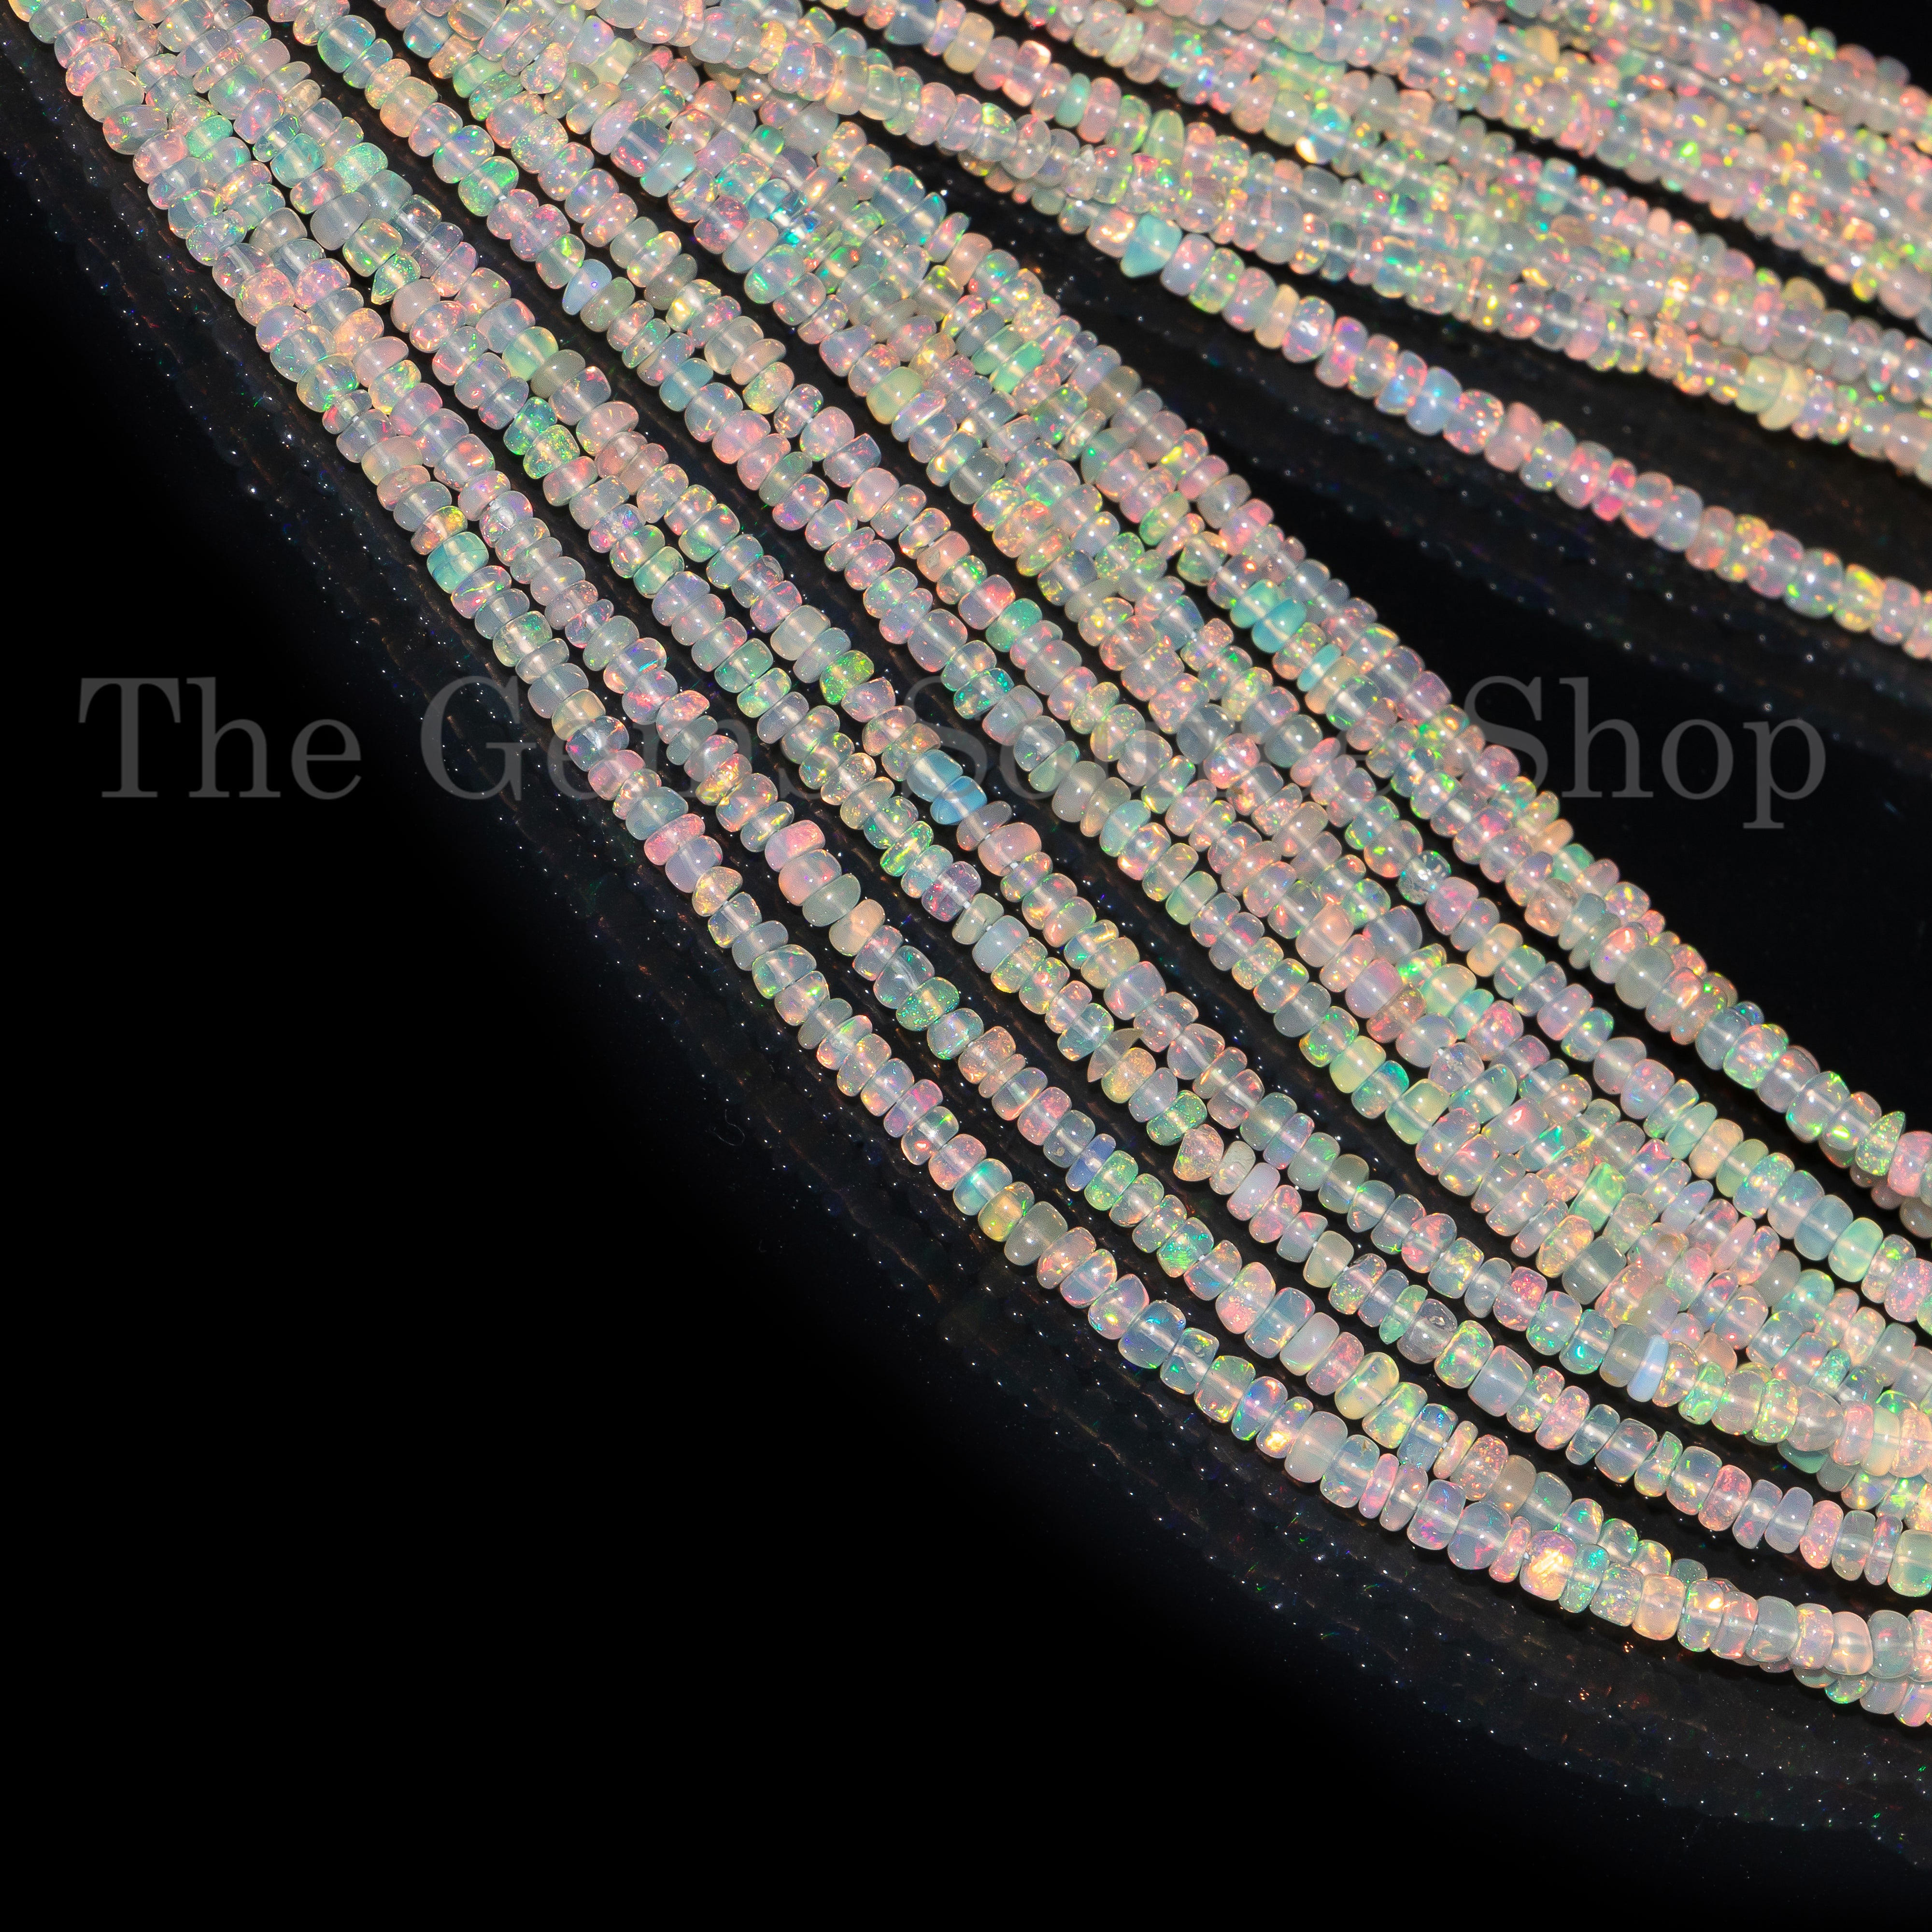 Top Quality Ethiopian Opal Beads, Opal Smooth Rondelle Gemstone Beads